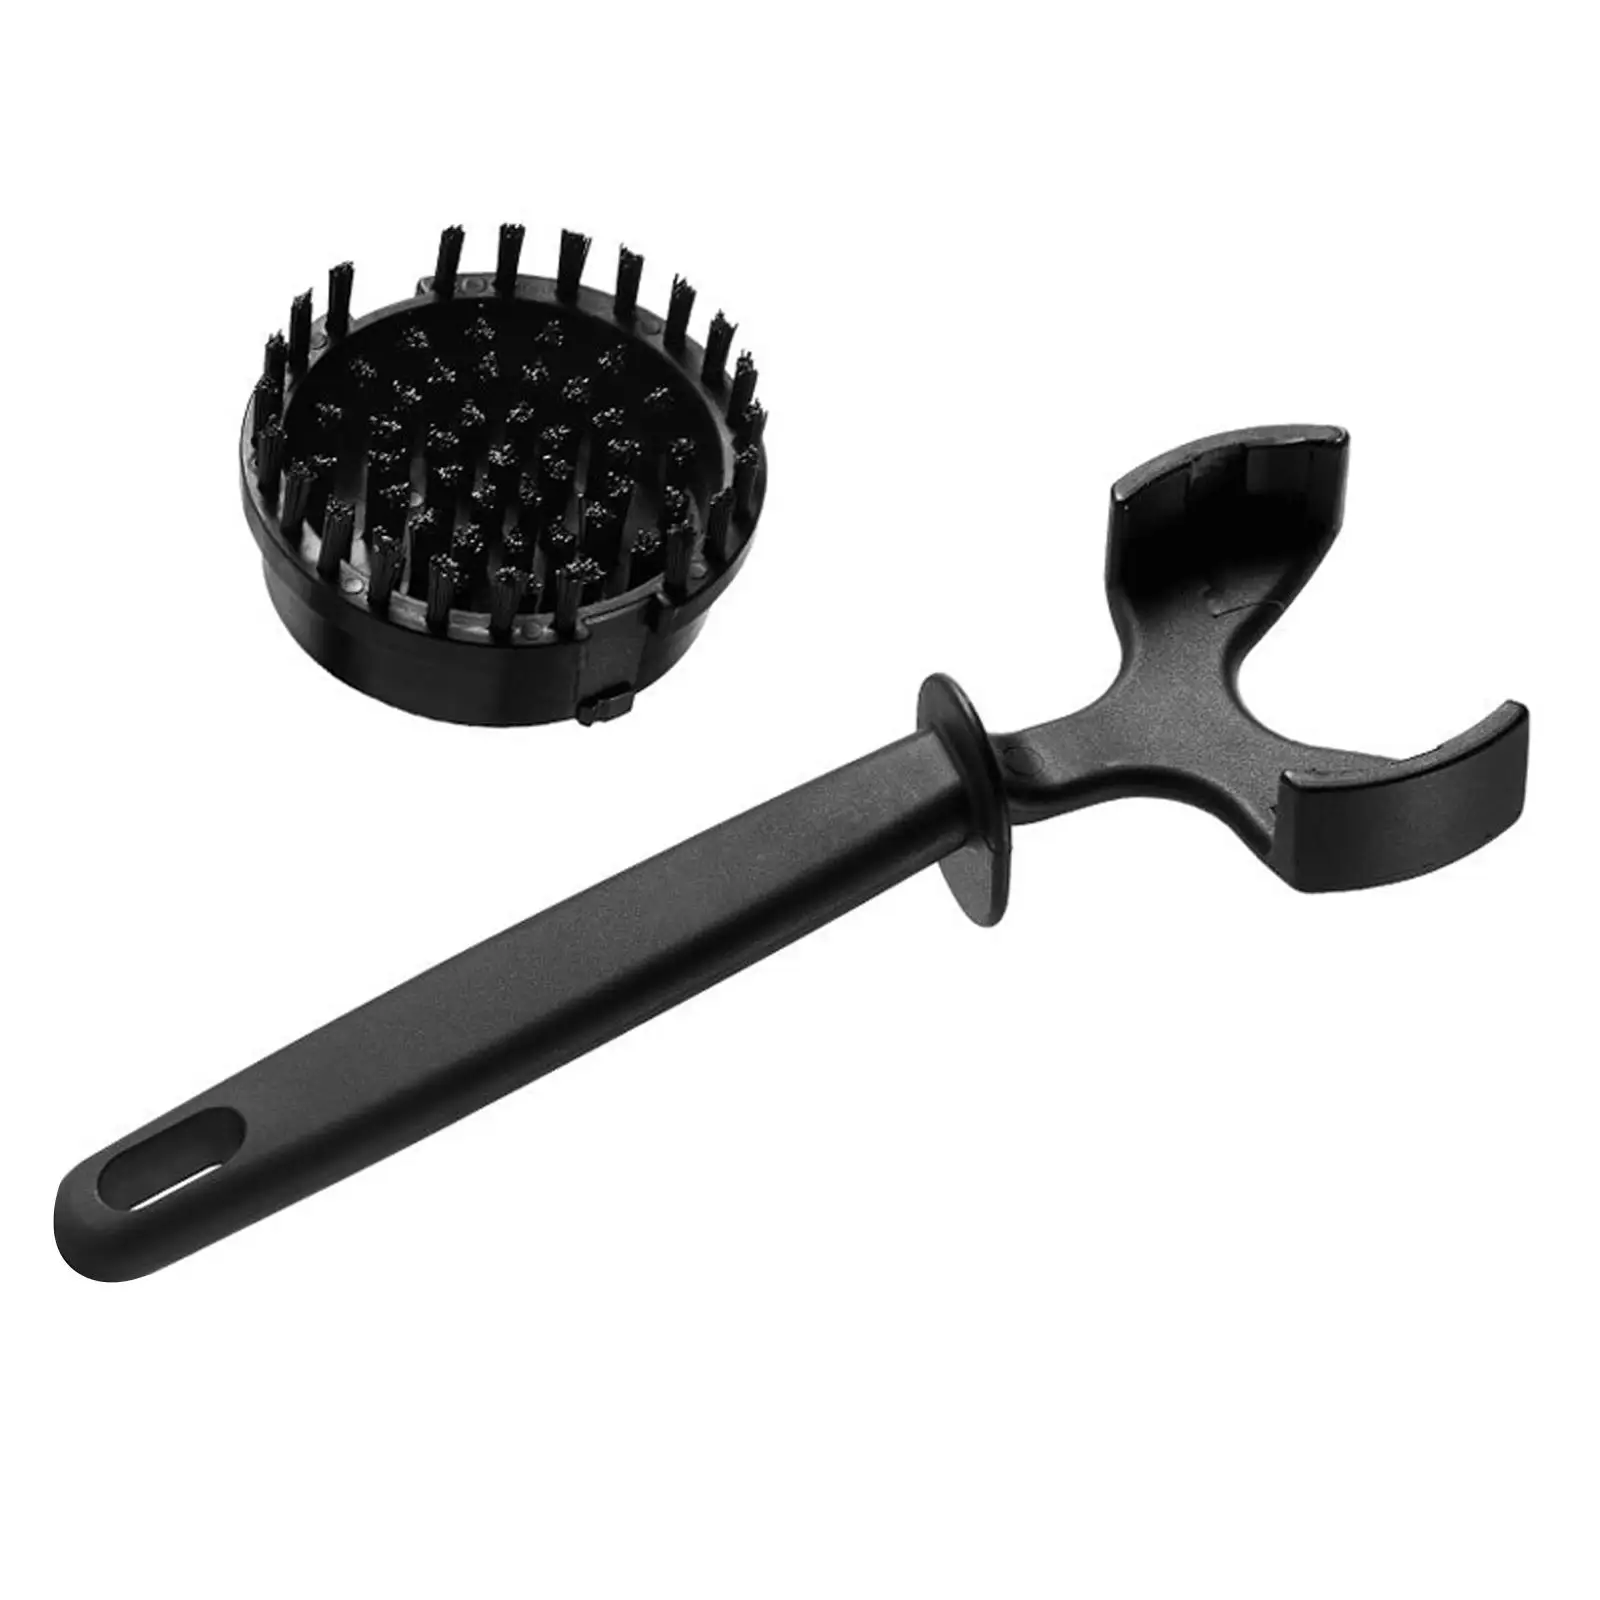 Coffee Machine Cleaning Brush Coffee Grinder Brush for Espresso Accessories Cleaning Tool